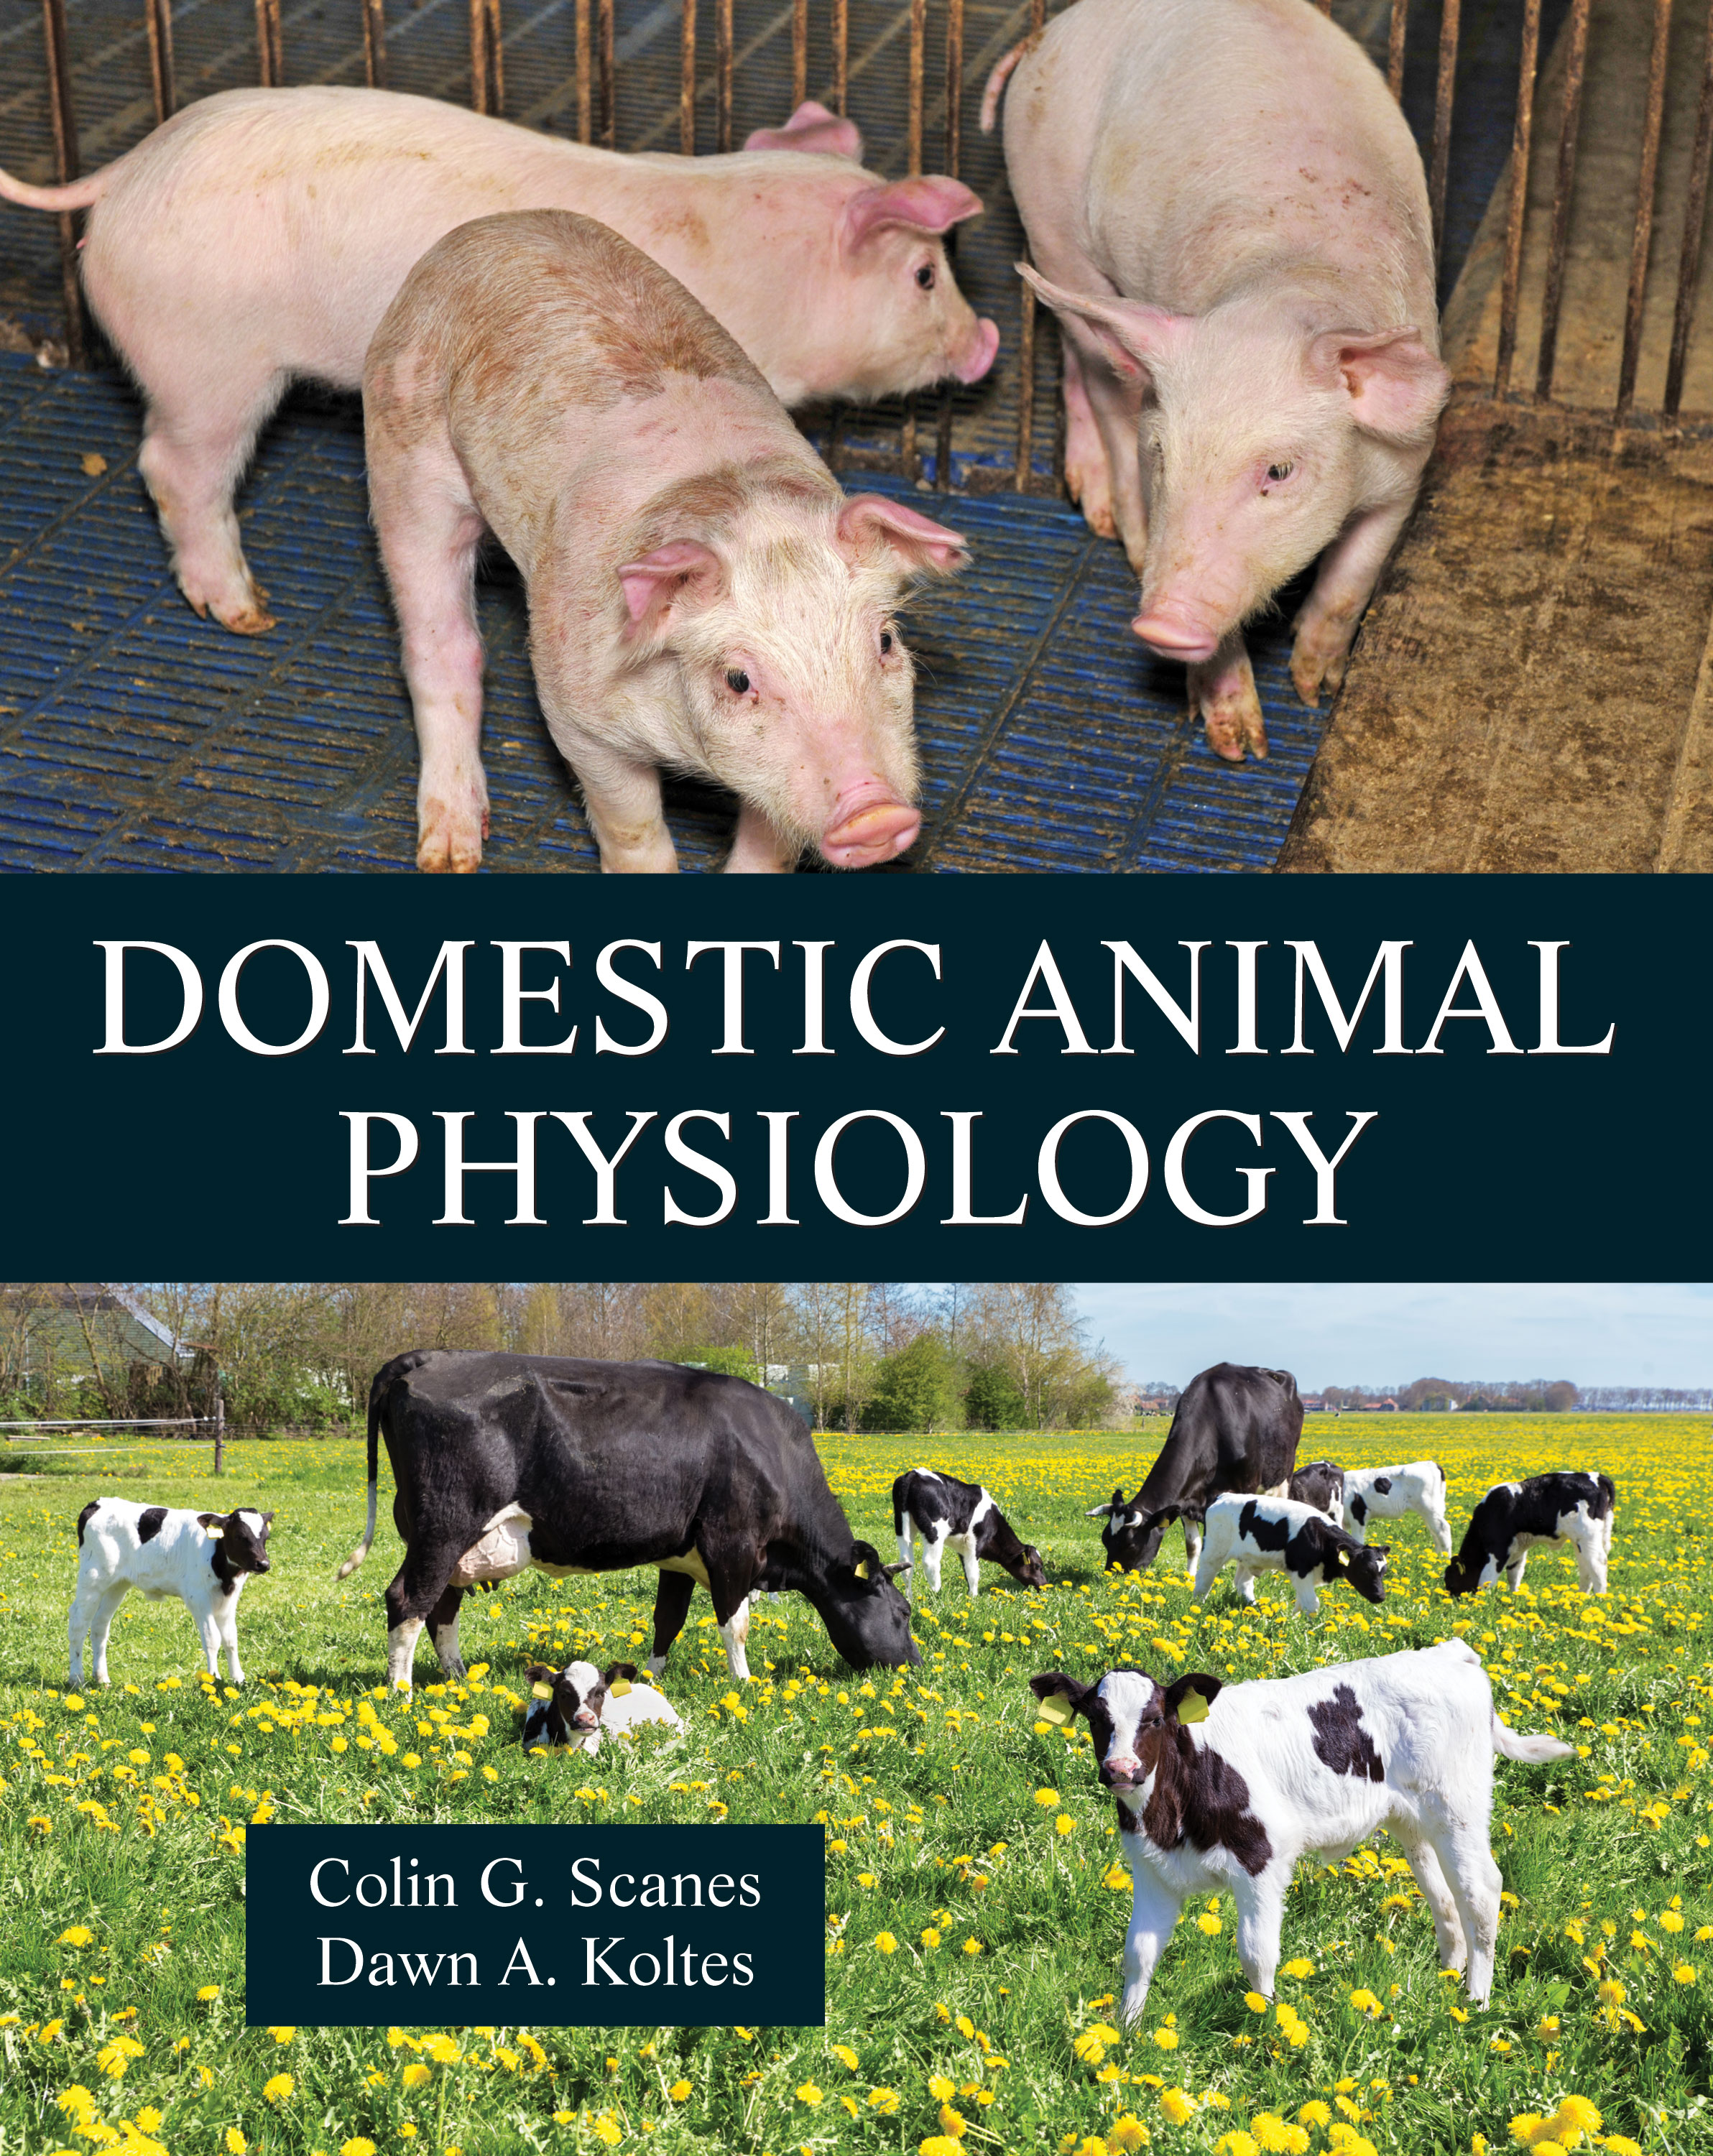 Domestic Animal Physiology:  by Colin G. Scanes, Dawn A. Koltes